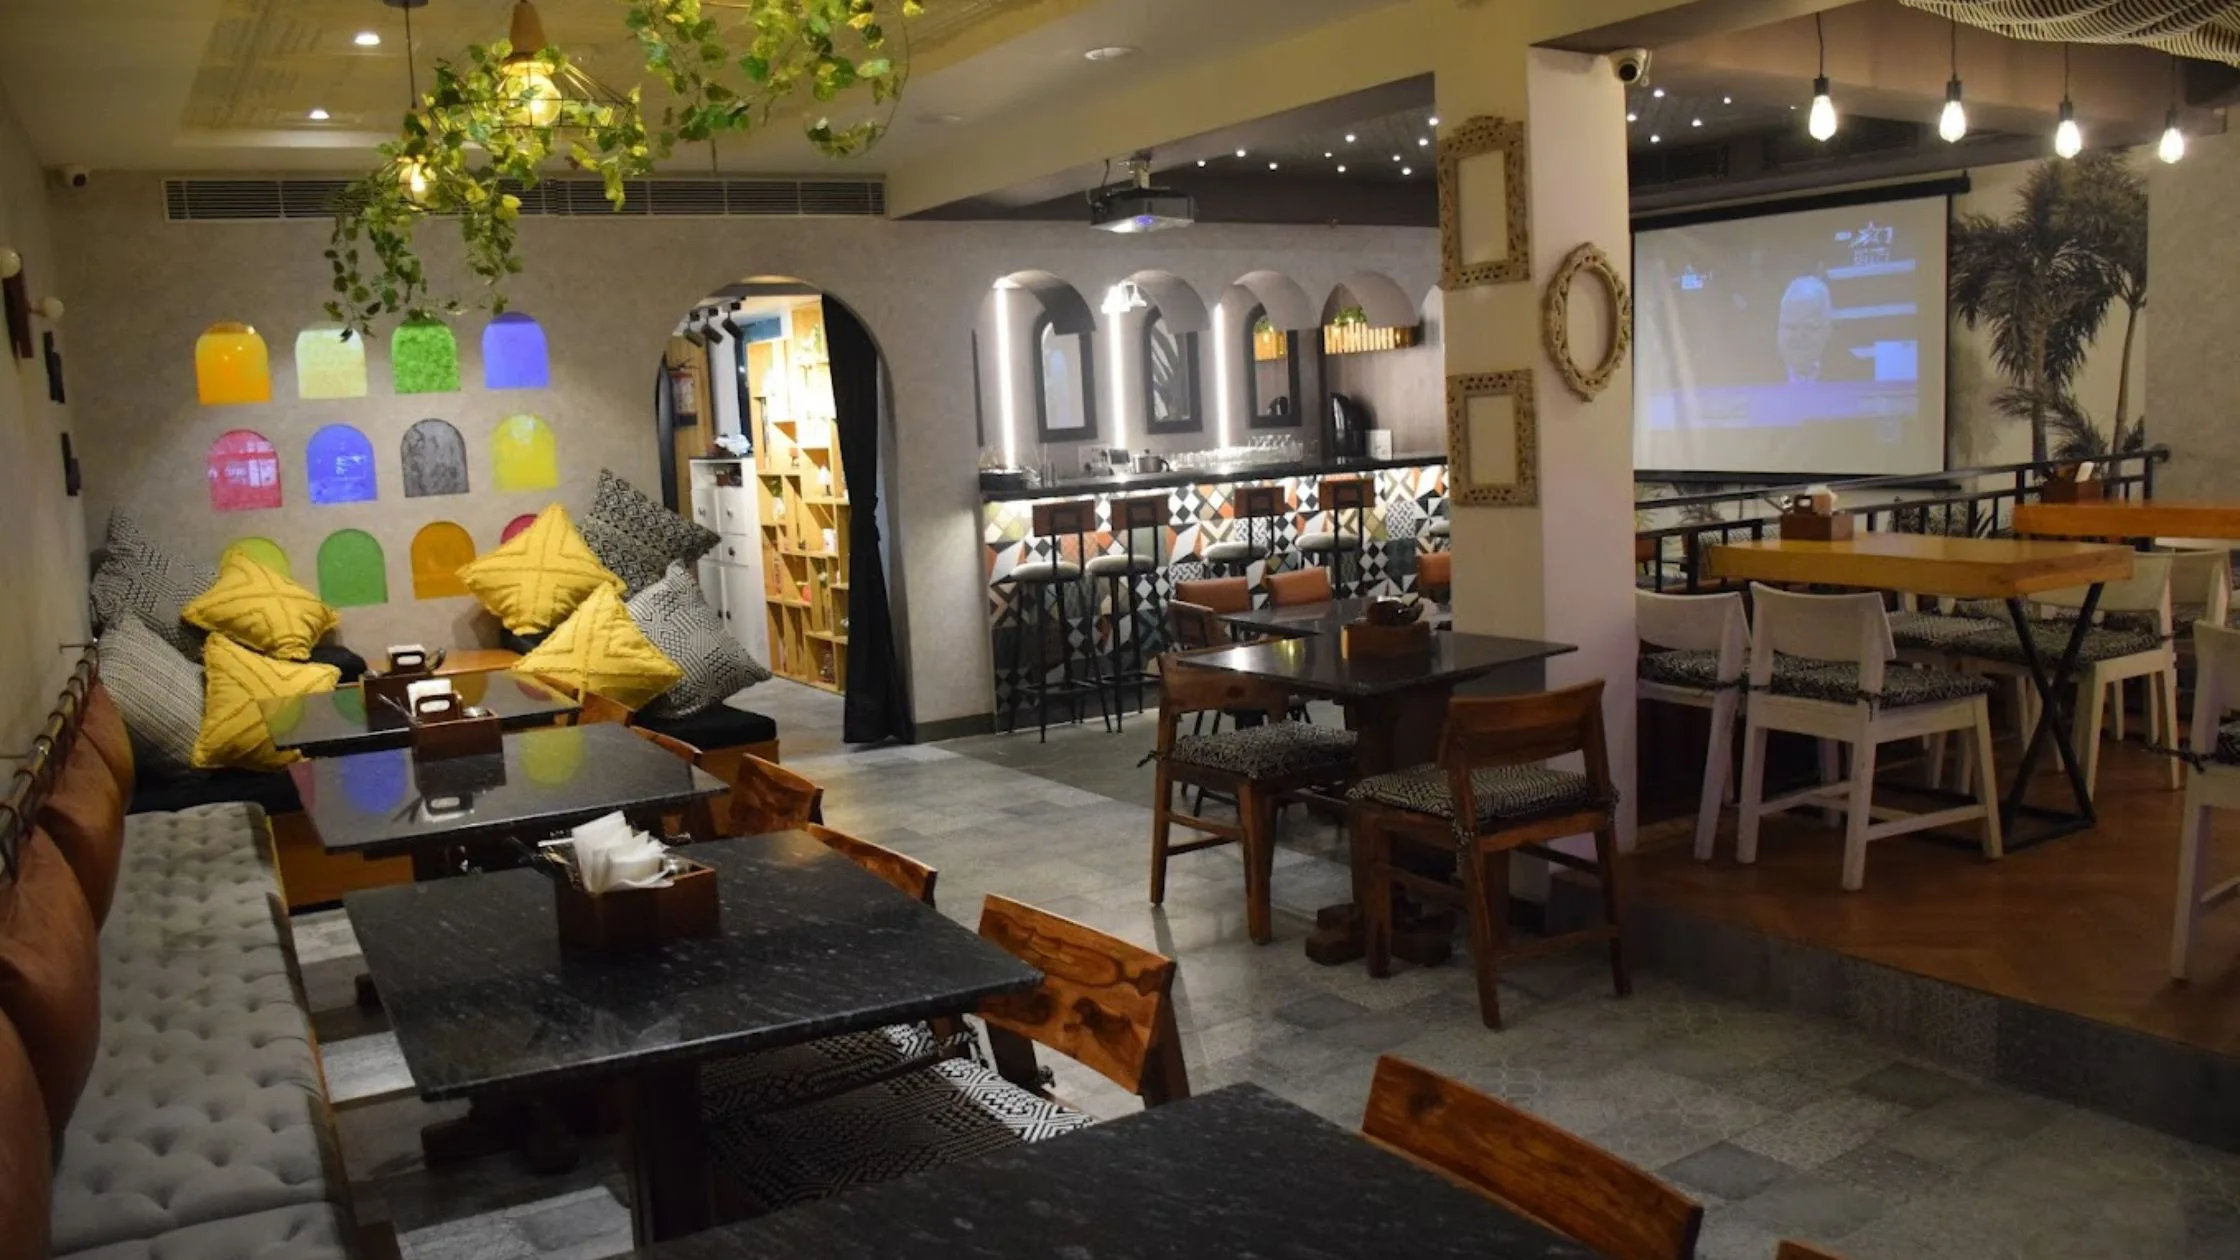 An inside view of Sambookas Cafe in Delhi